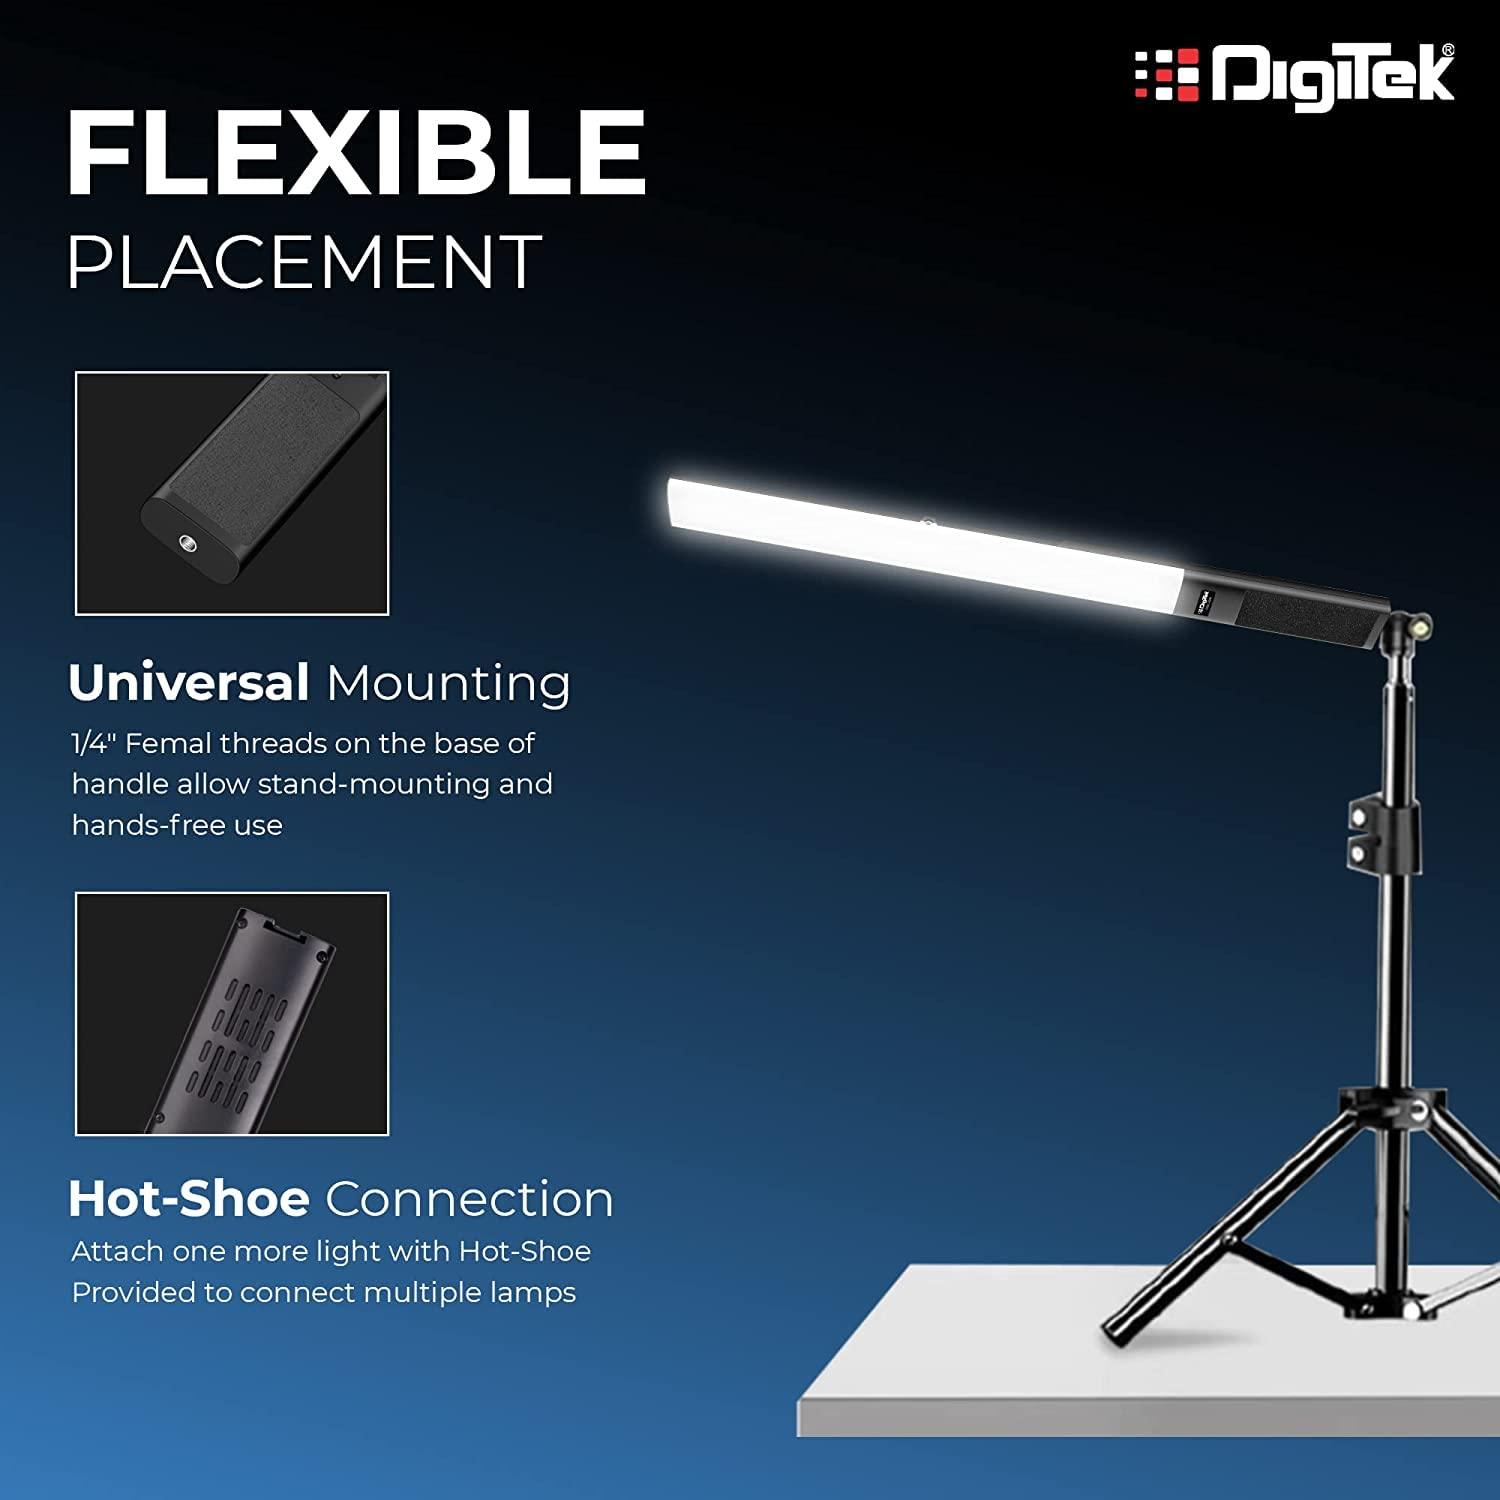 Digitek (DSL-20W RGB Combo) Portable Handheld RGB LED Light Wand with NP F750 Battery & Remote for YouTube, Photo-Shoot, Video Shoot, Live Stream, Makeup & More,...DSL-20W RGB Combo - Digitek